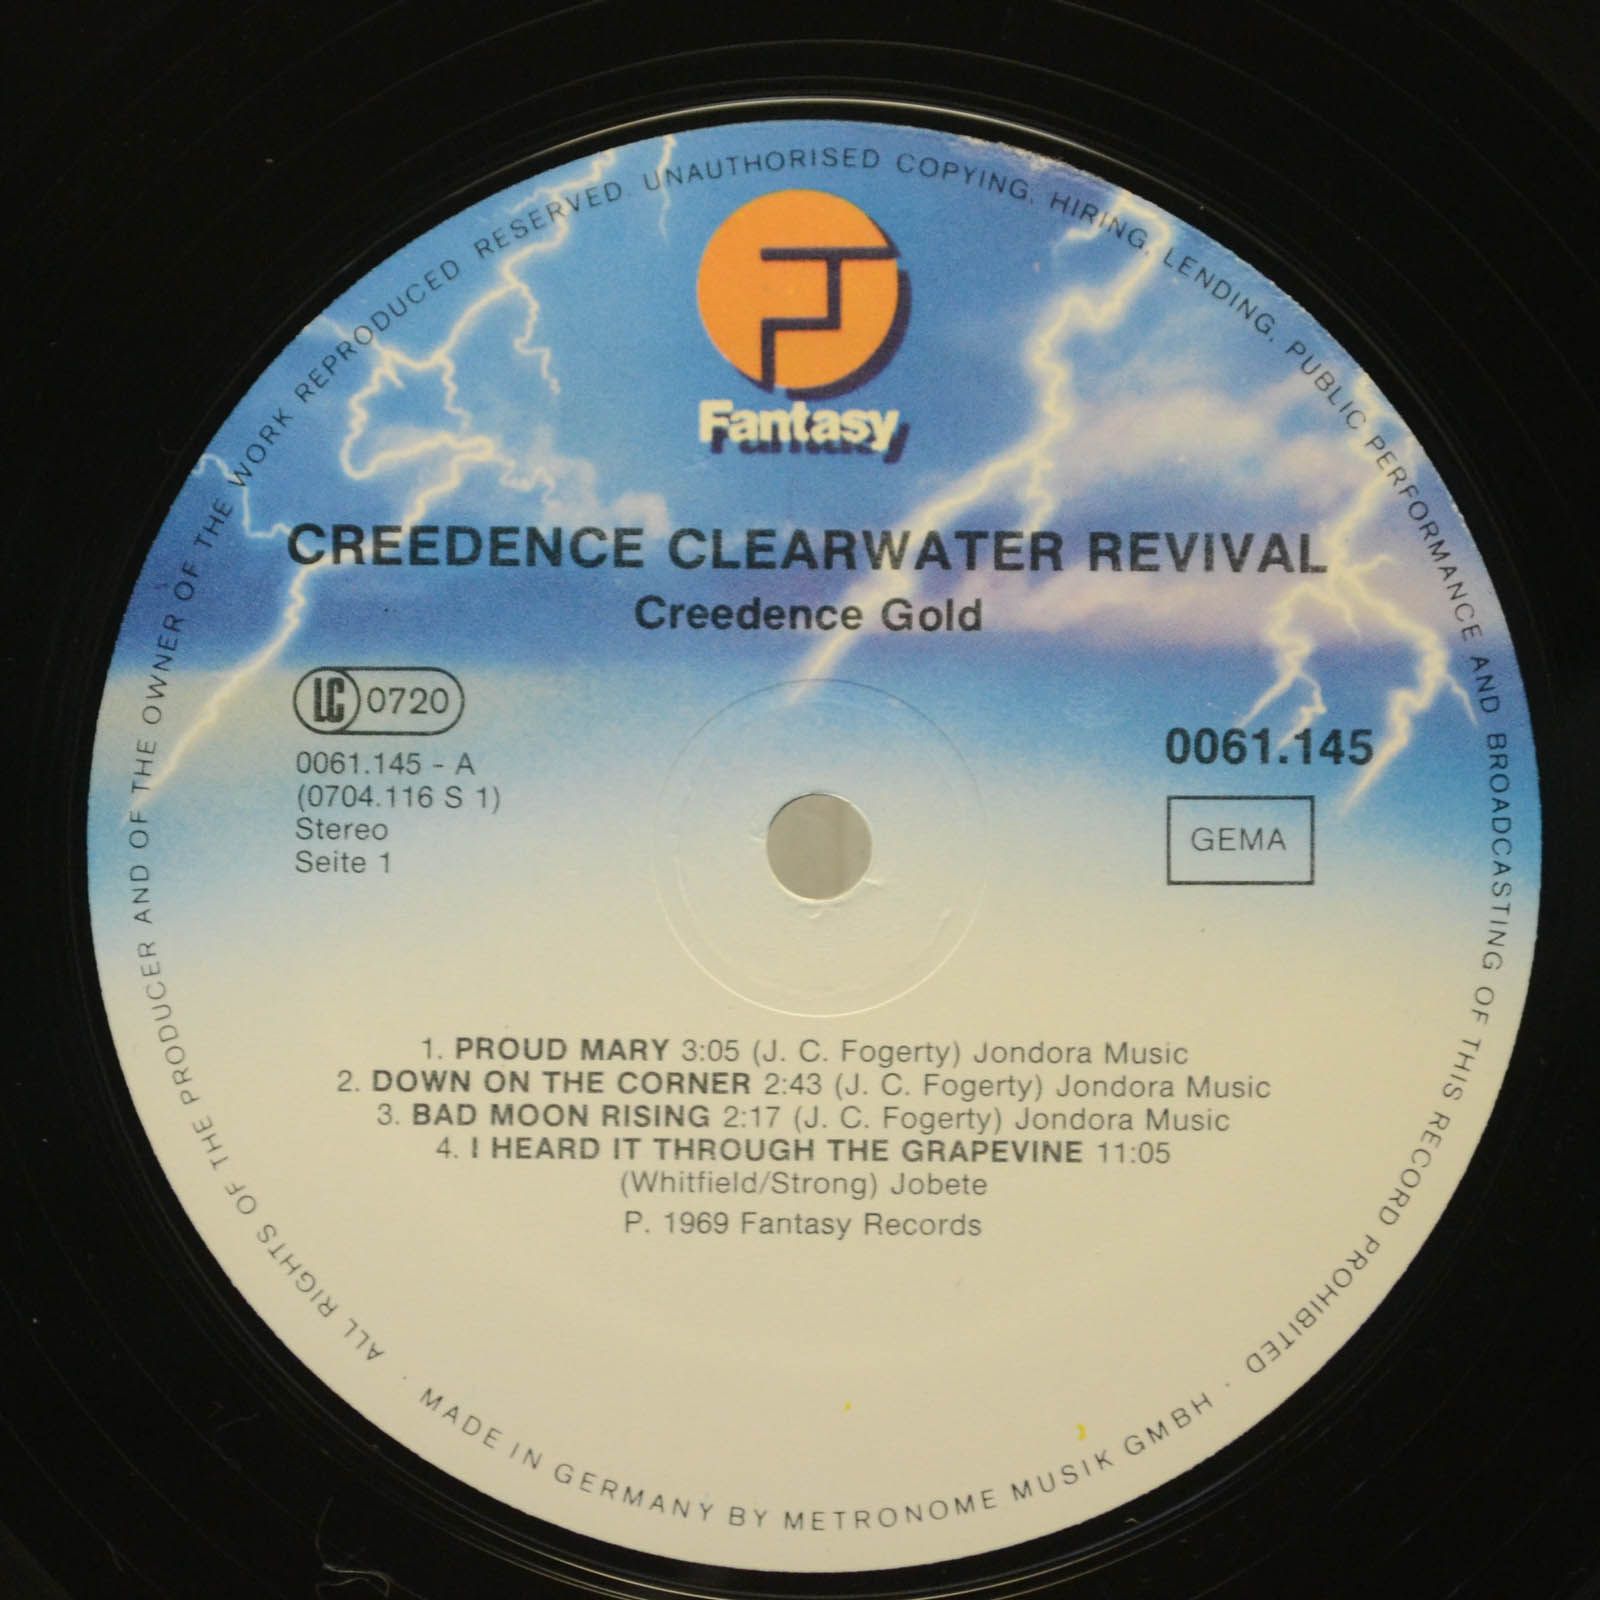 Creedence Clearwater Revival — Creedence Gold, 1972